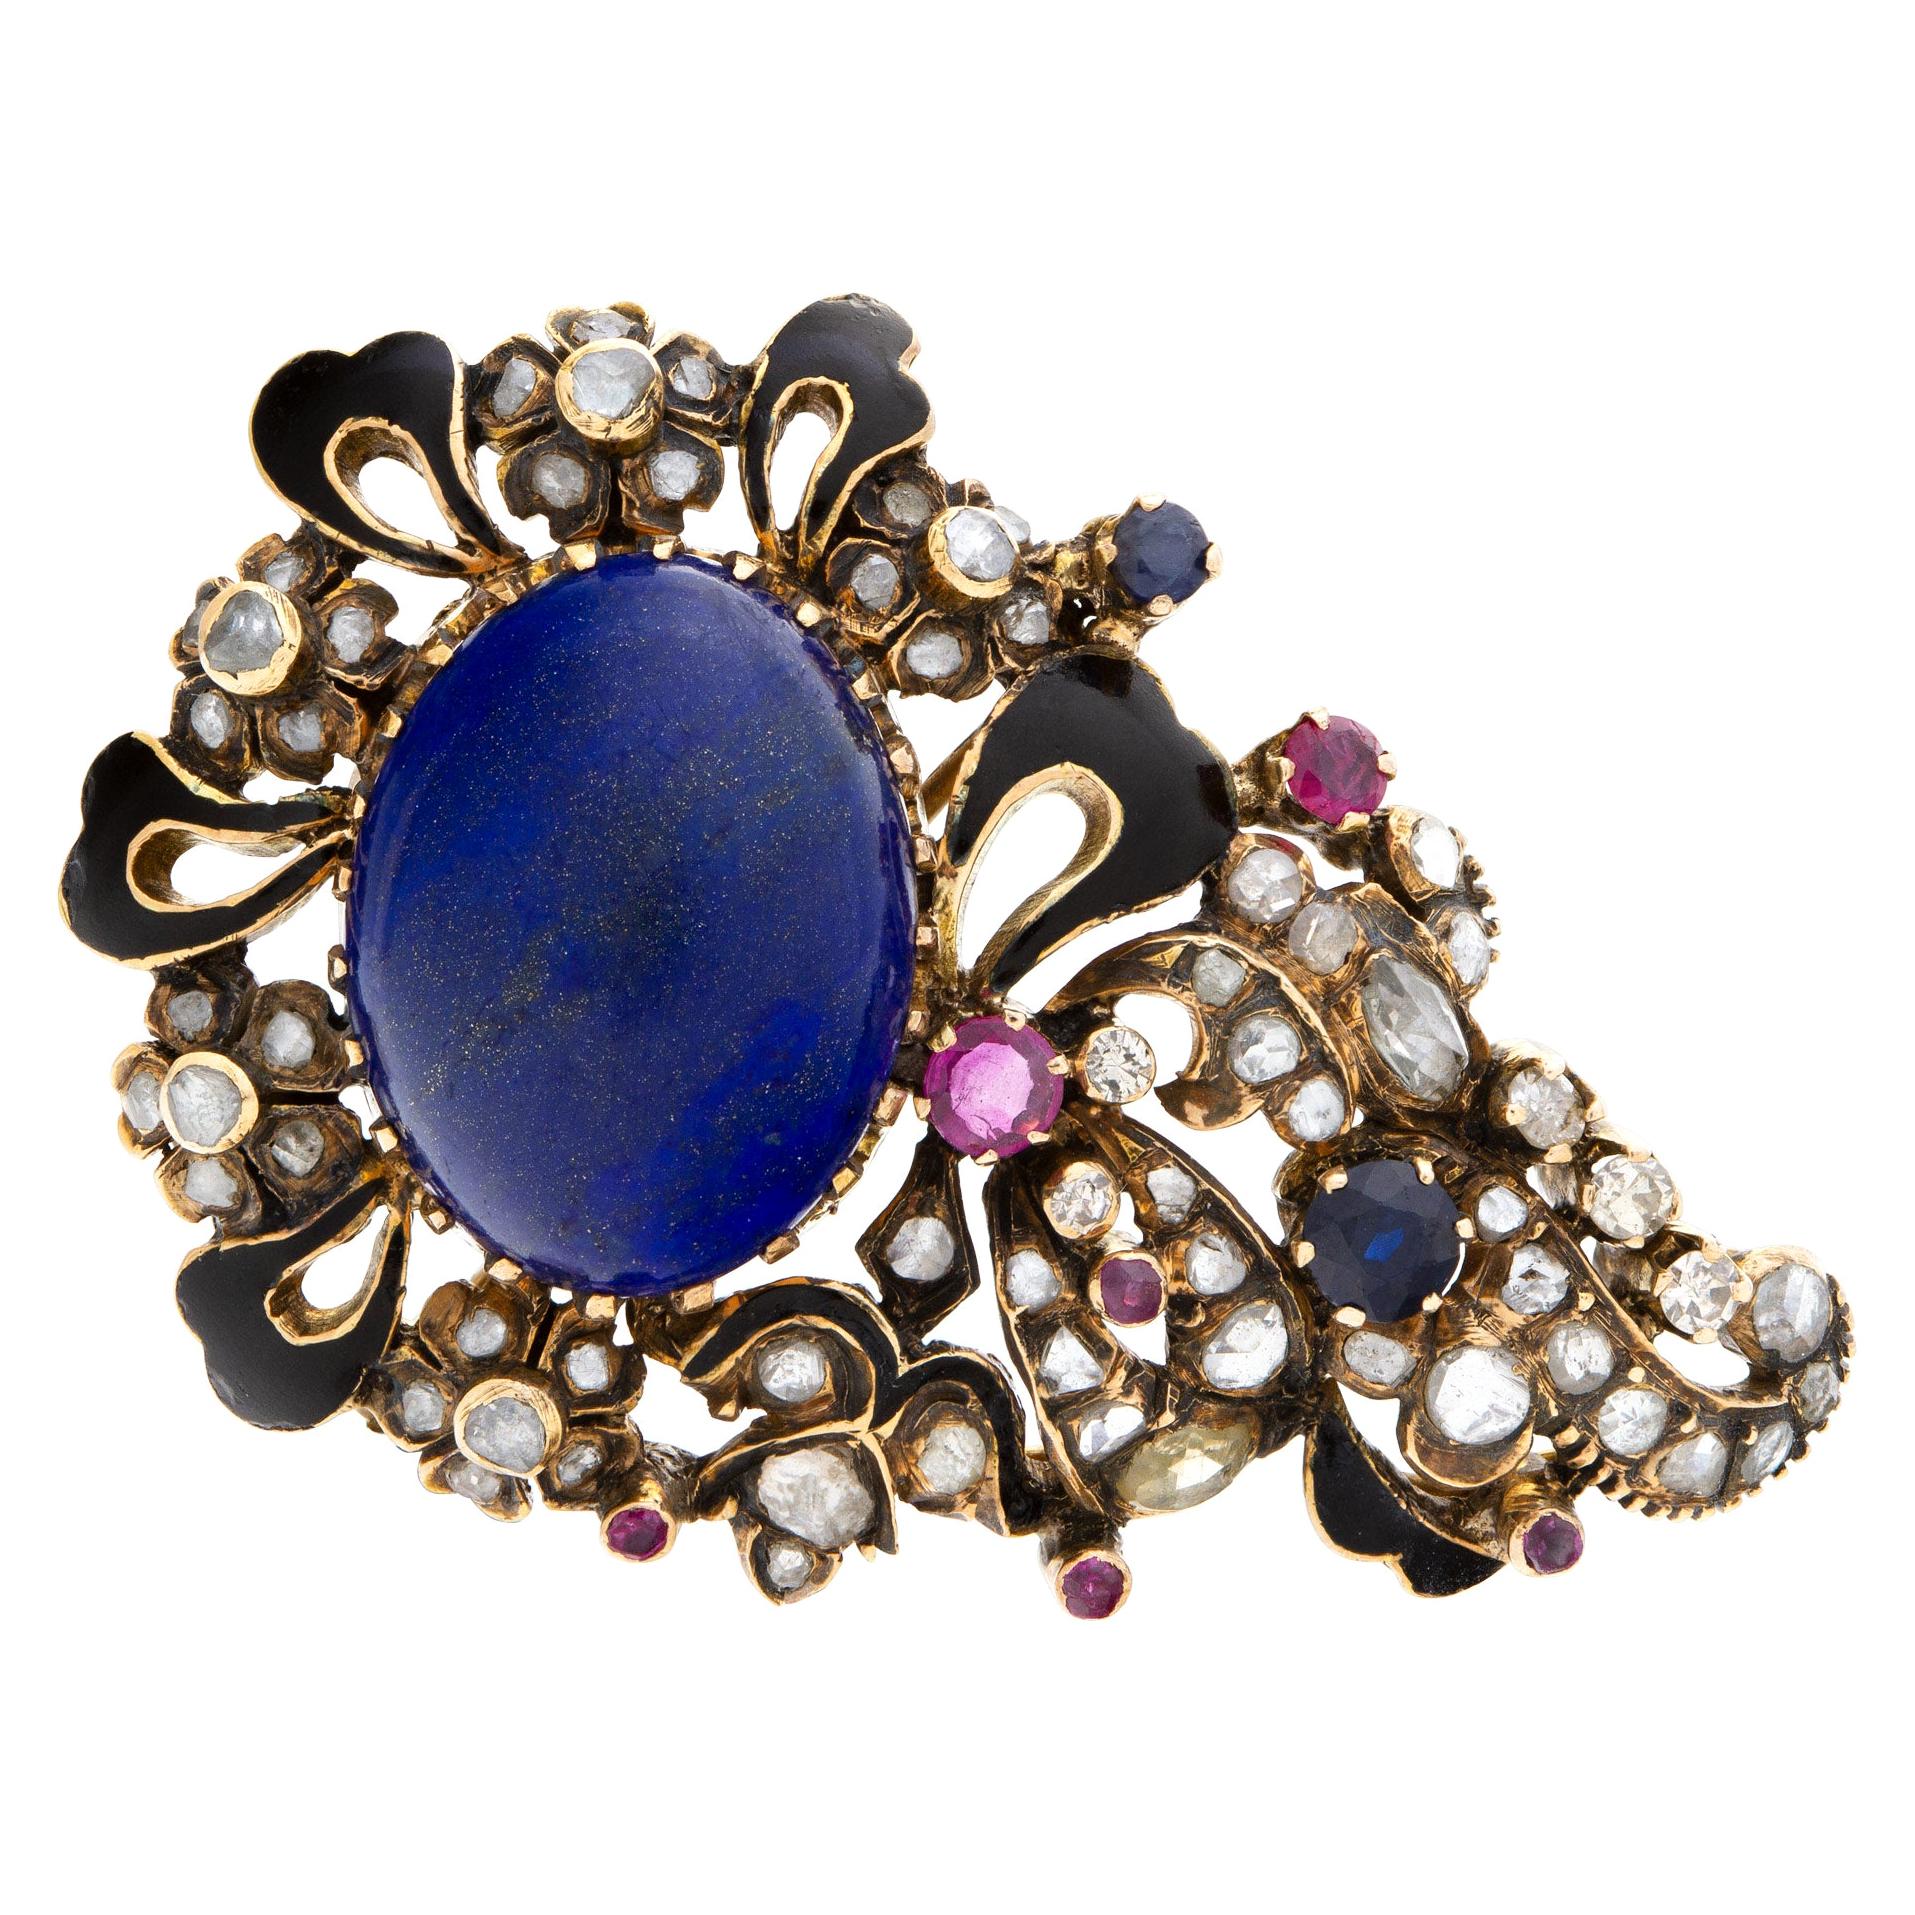 Antique Brooch with Cabochon Lapis Lazuli Center and Rose & Diamonds